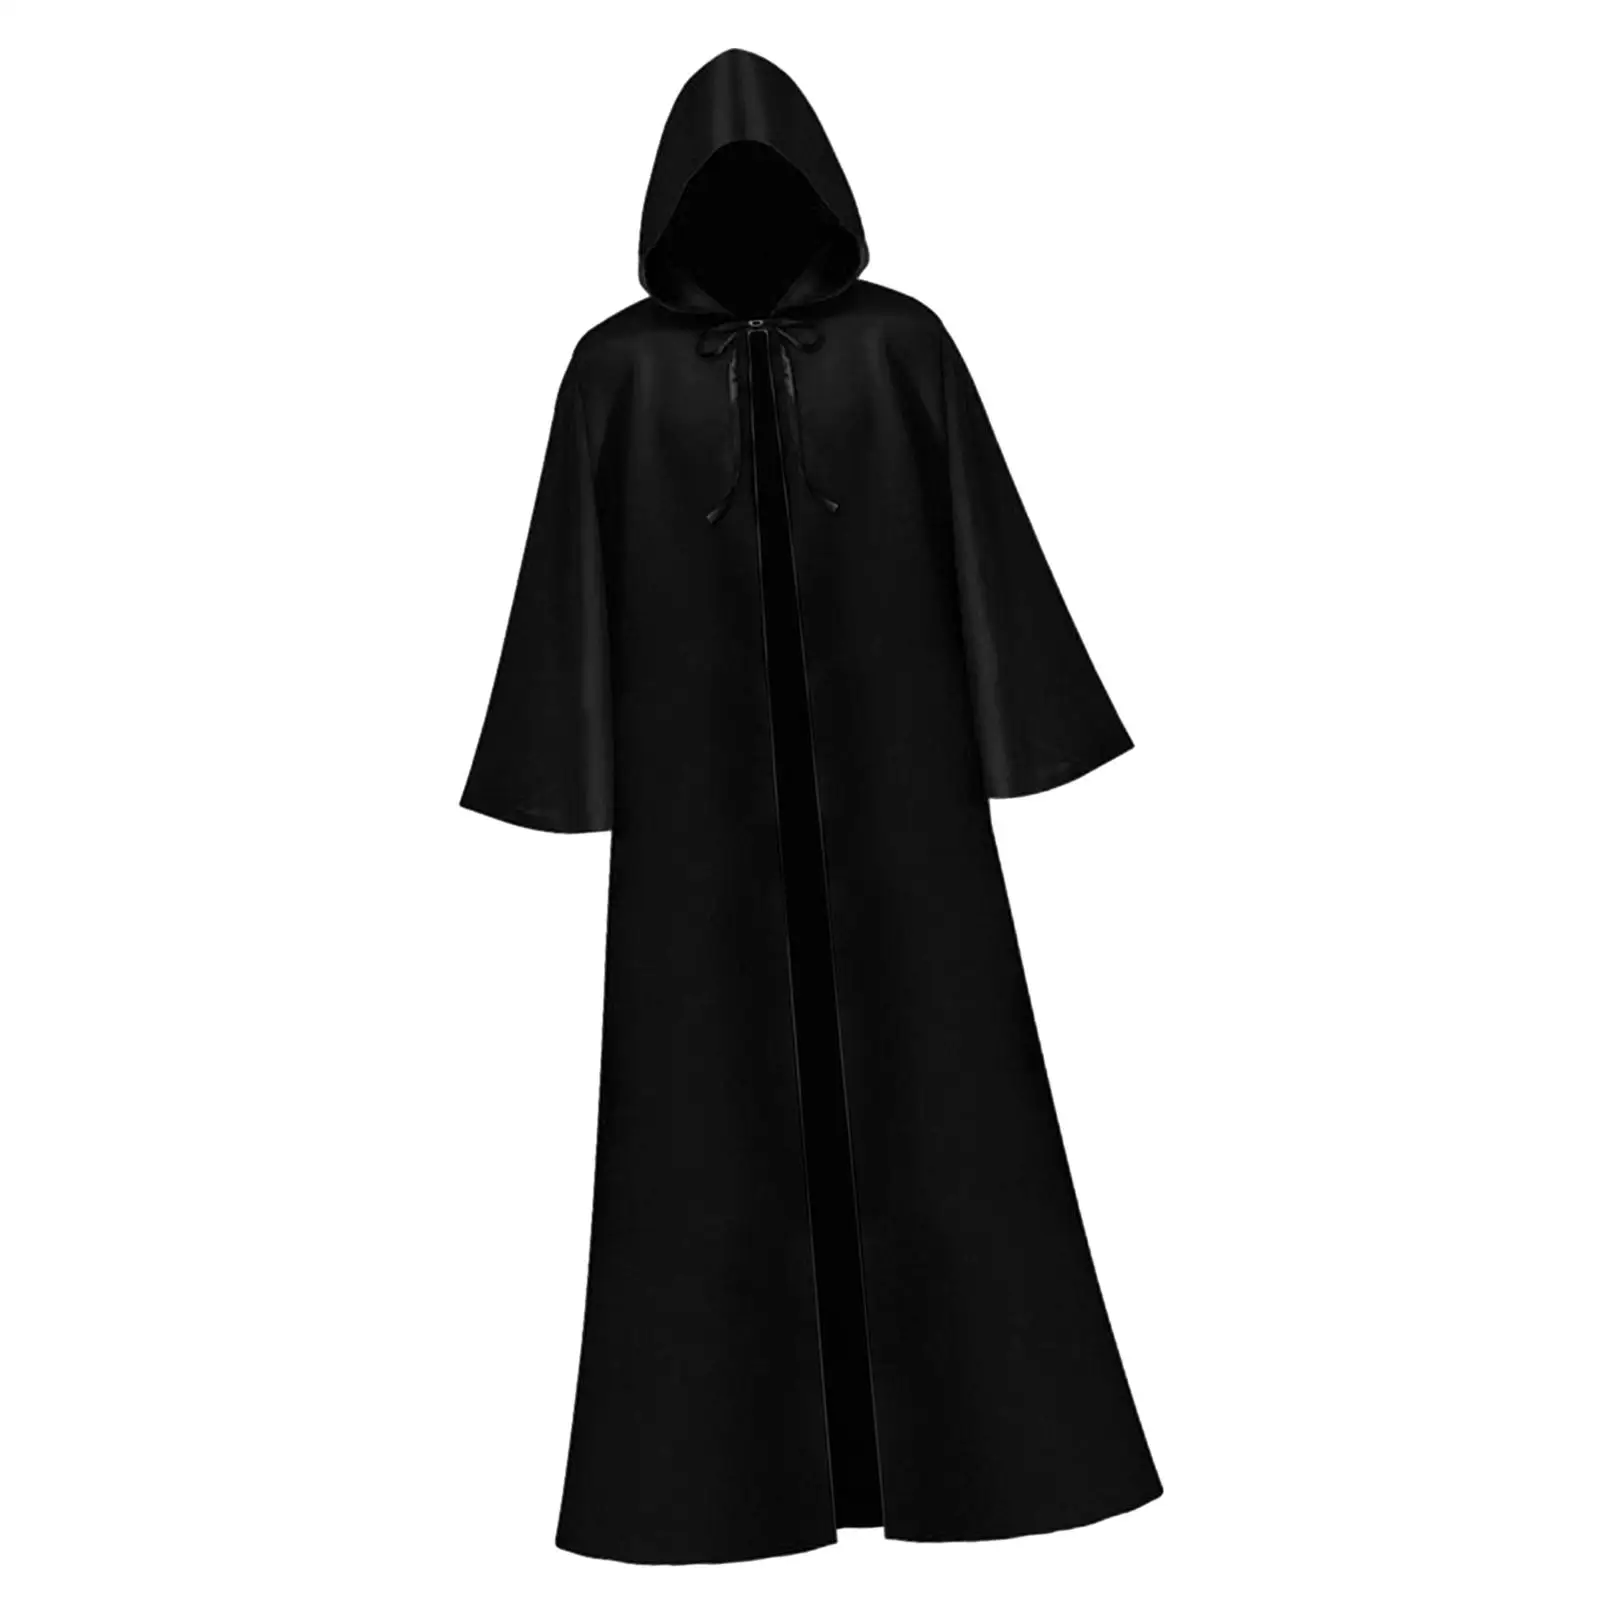 

Halloween Hooded Cloak Grim Cowl Devil Cape Devil Outfit Long Hooded Cloak for Club Fancy Dress Party Easter Carnival Punk Party